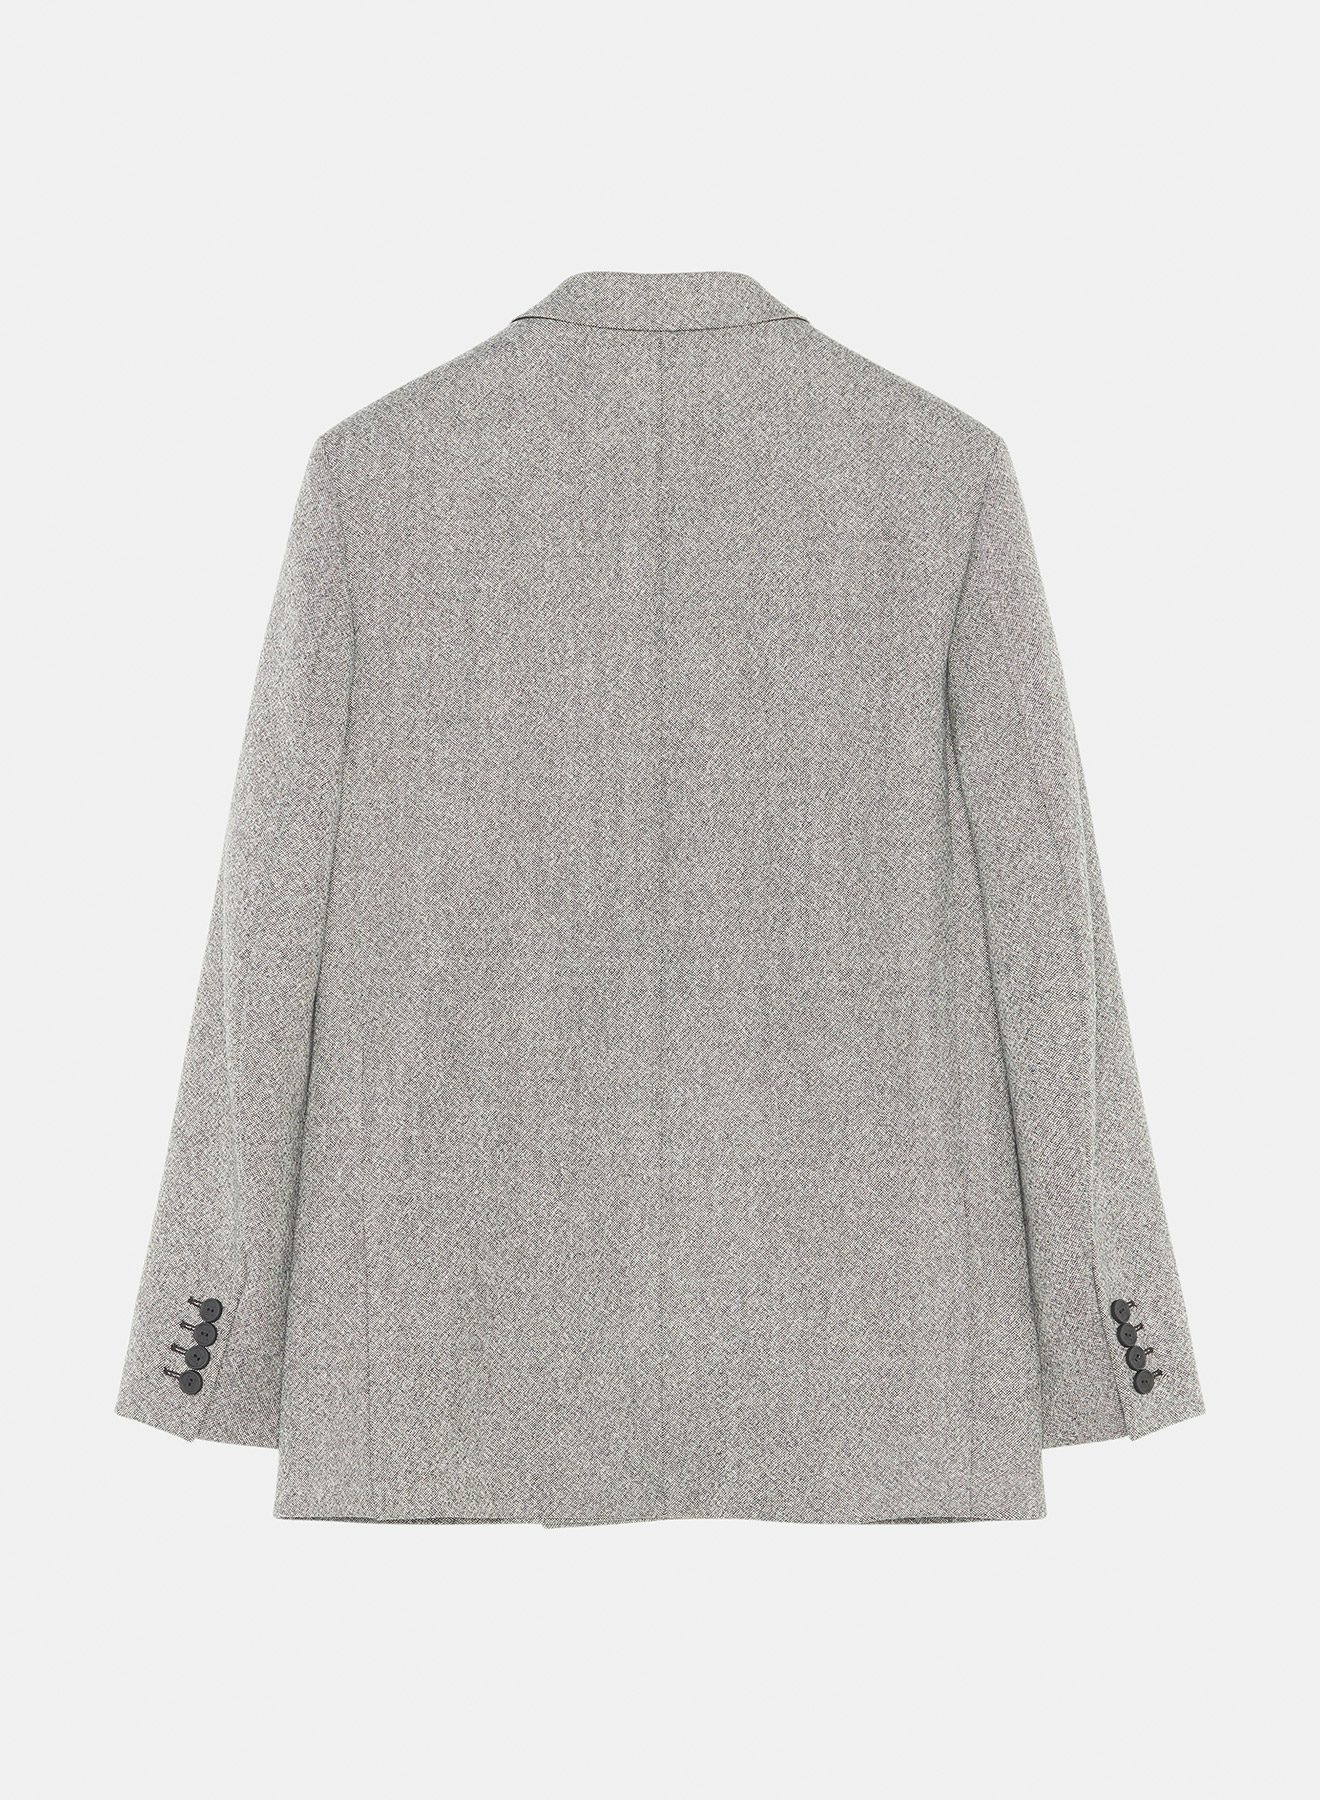 Speckled wool jacket with drawstrings black white - Nina Ricci